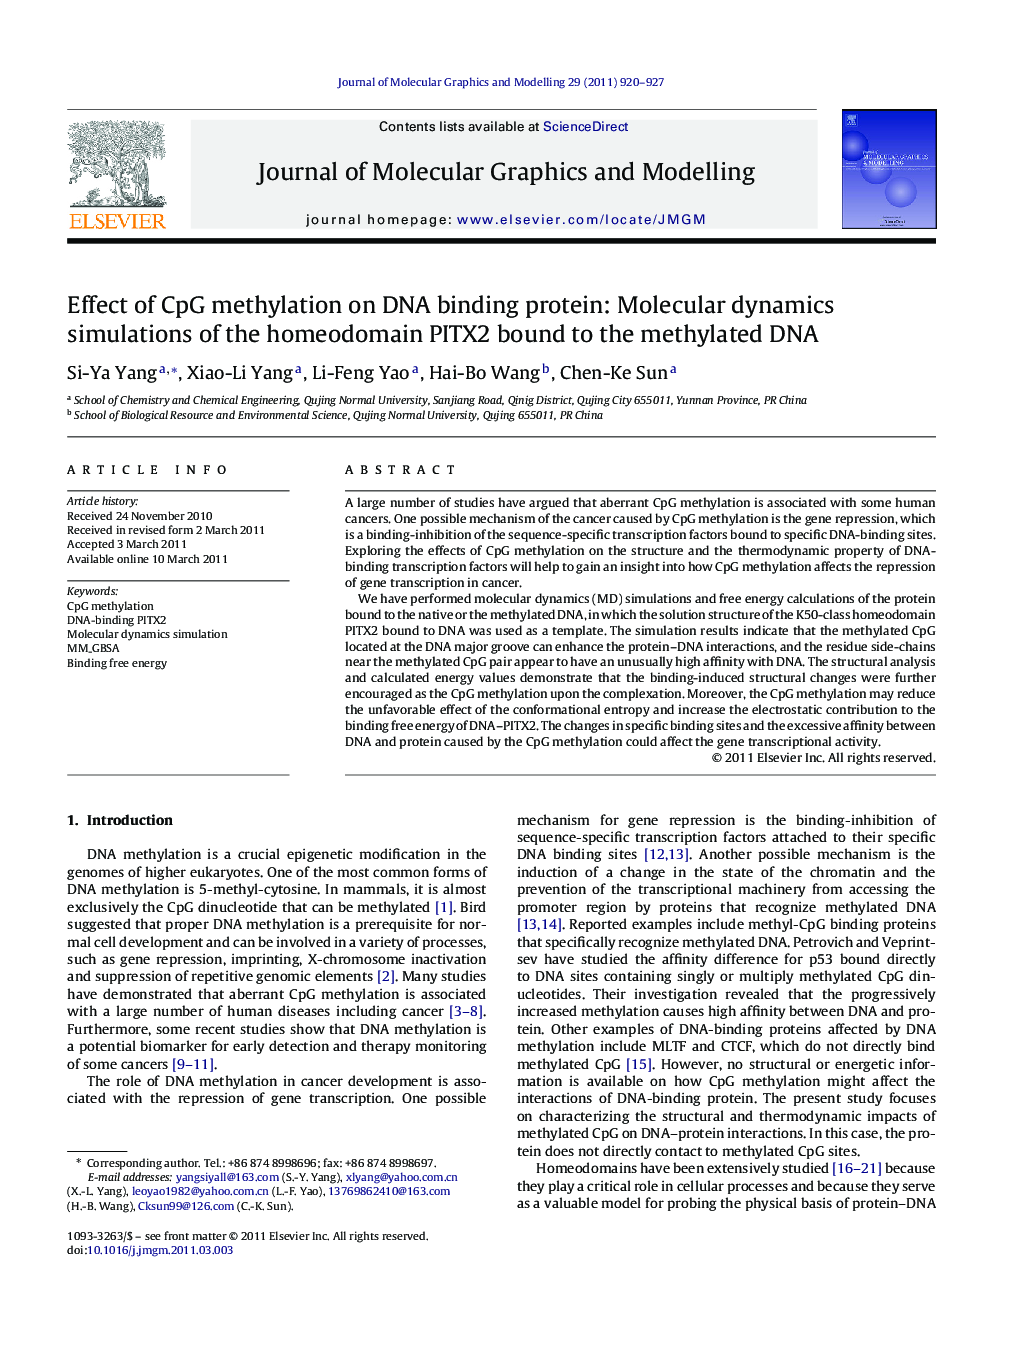 Effect of CpG methylation on DNA binding protein: Molecular dynamics simulations of the homeodomain PITX2 bound to the methylated DNA